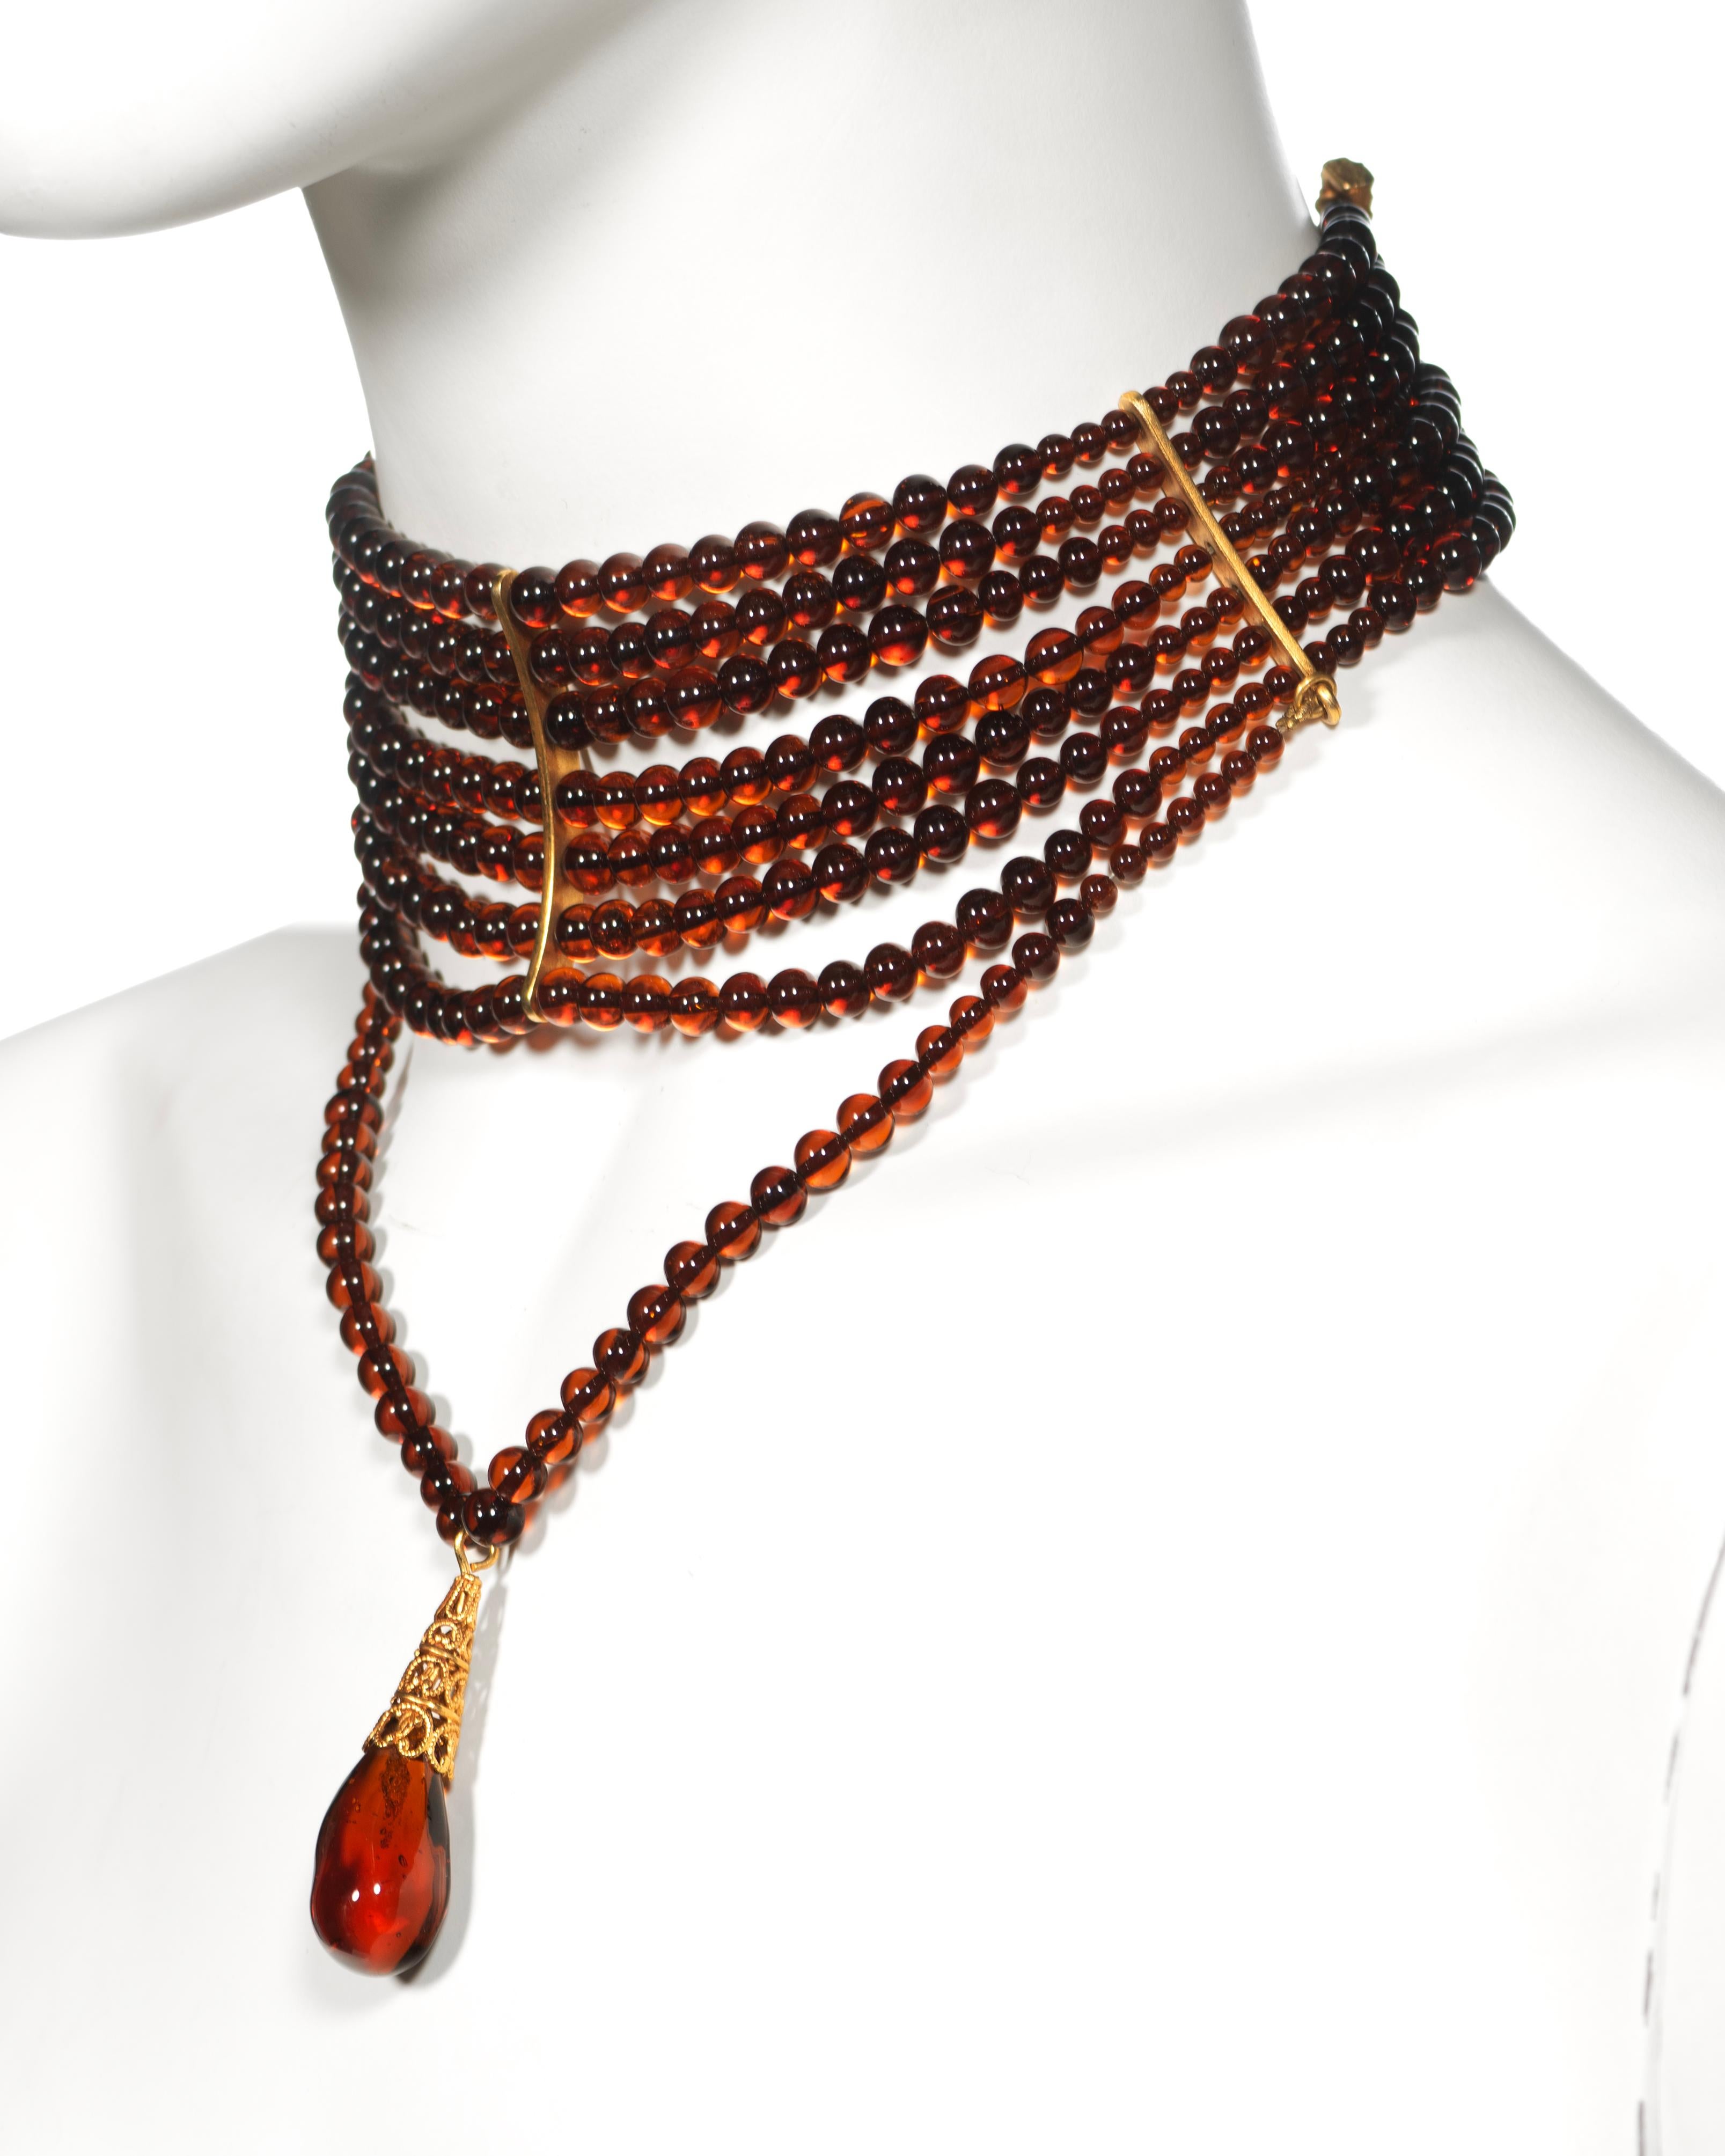 Christian Dior by John Galliano Amber Glass Bead Choker Necklace, c. 1998 For Sale 4